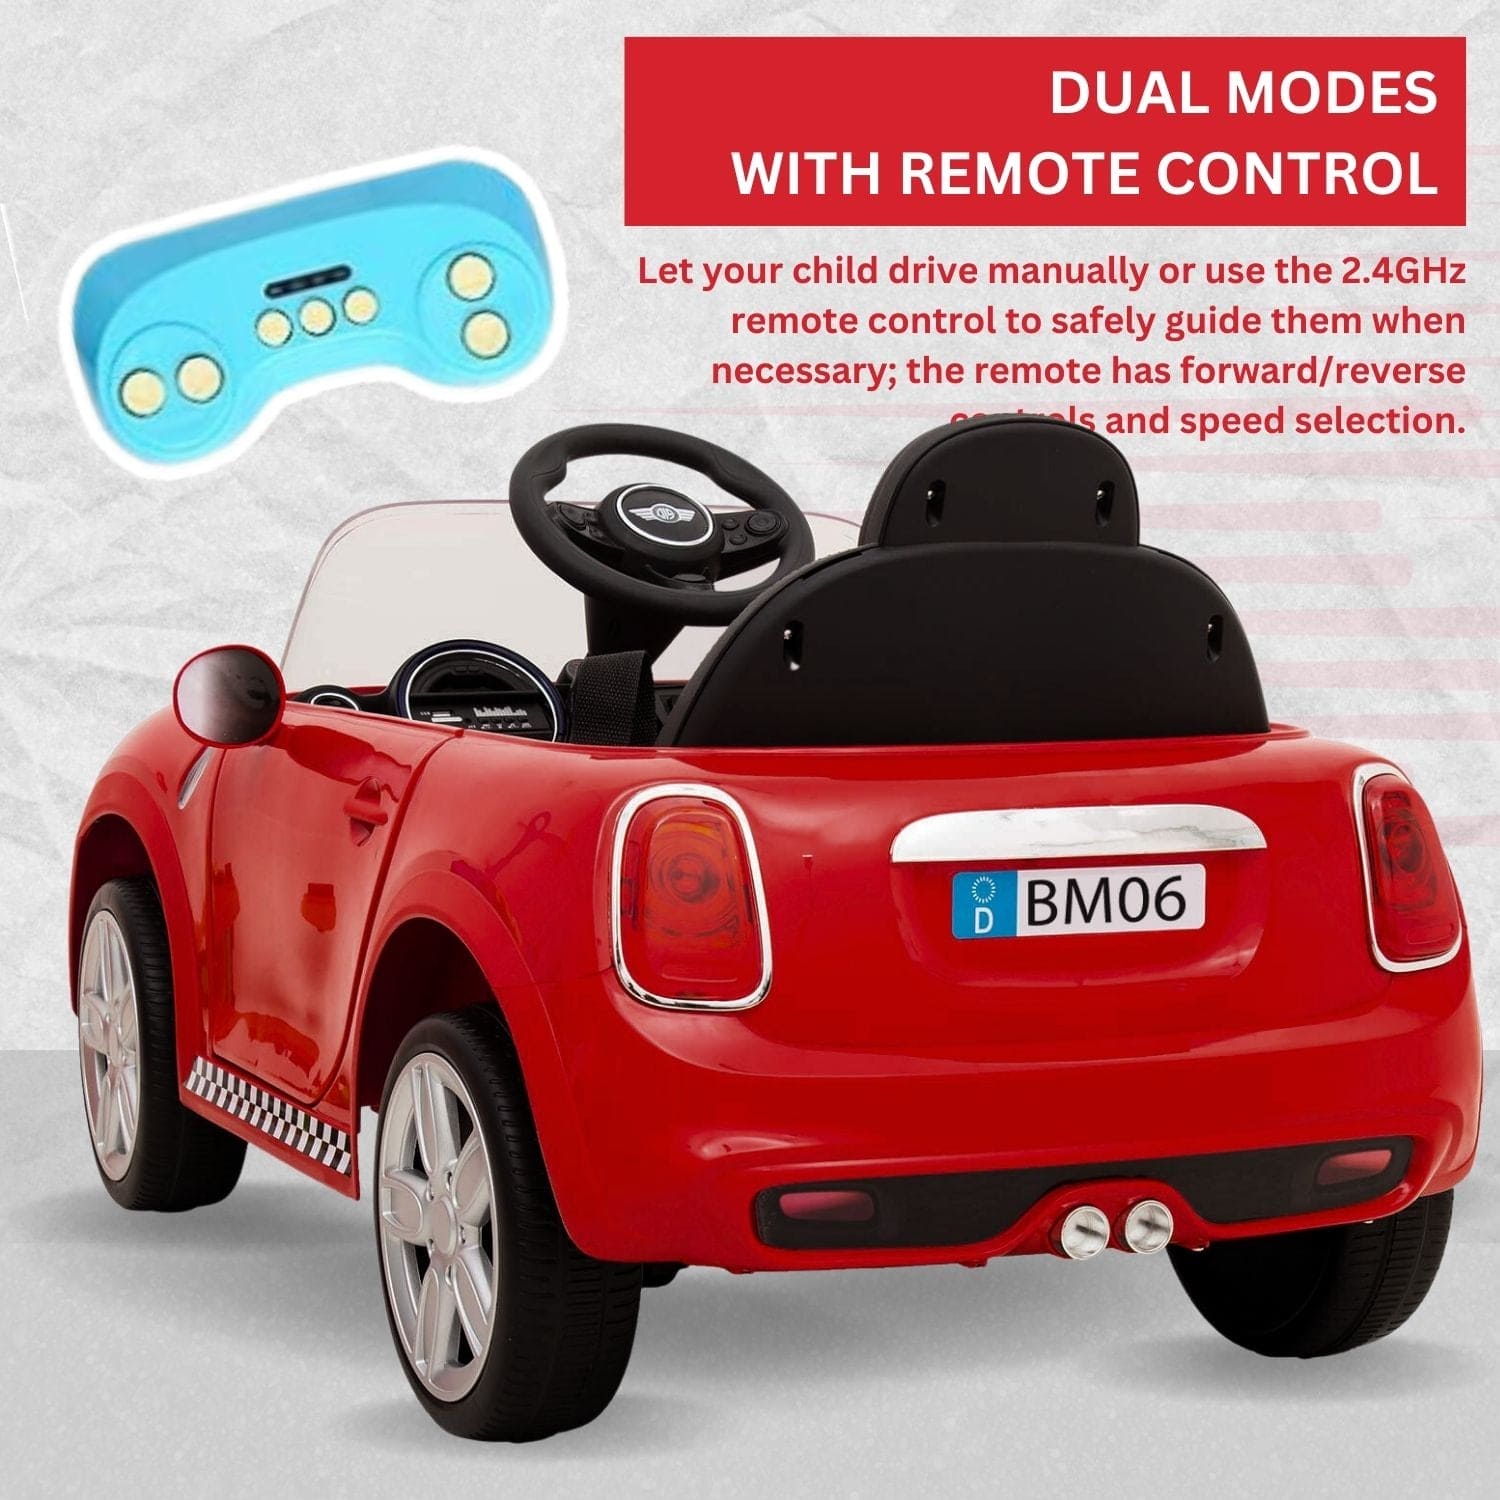 Baby Moo Mini Cooper Electric Ride-On Car for Kids | Rechargeable 12V Battery | Remote Control | USB MP3 Player | Ages 1-5 - Red